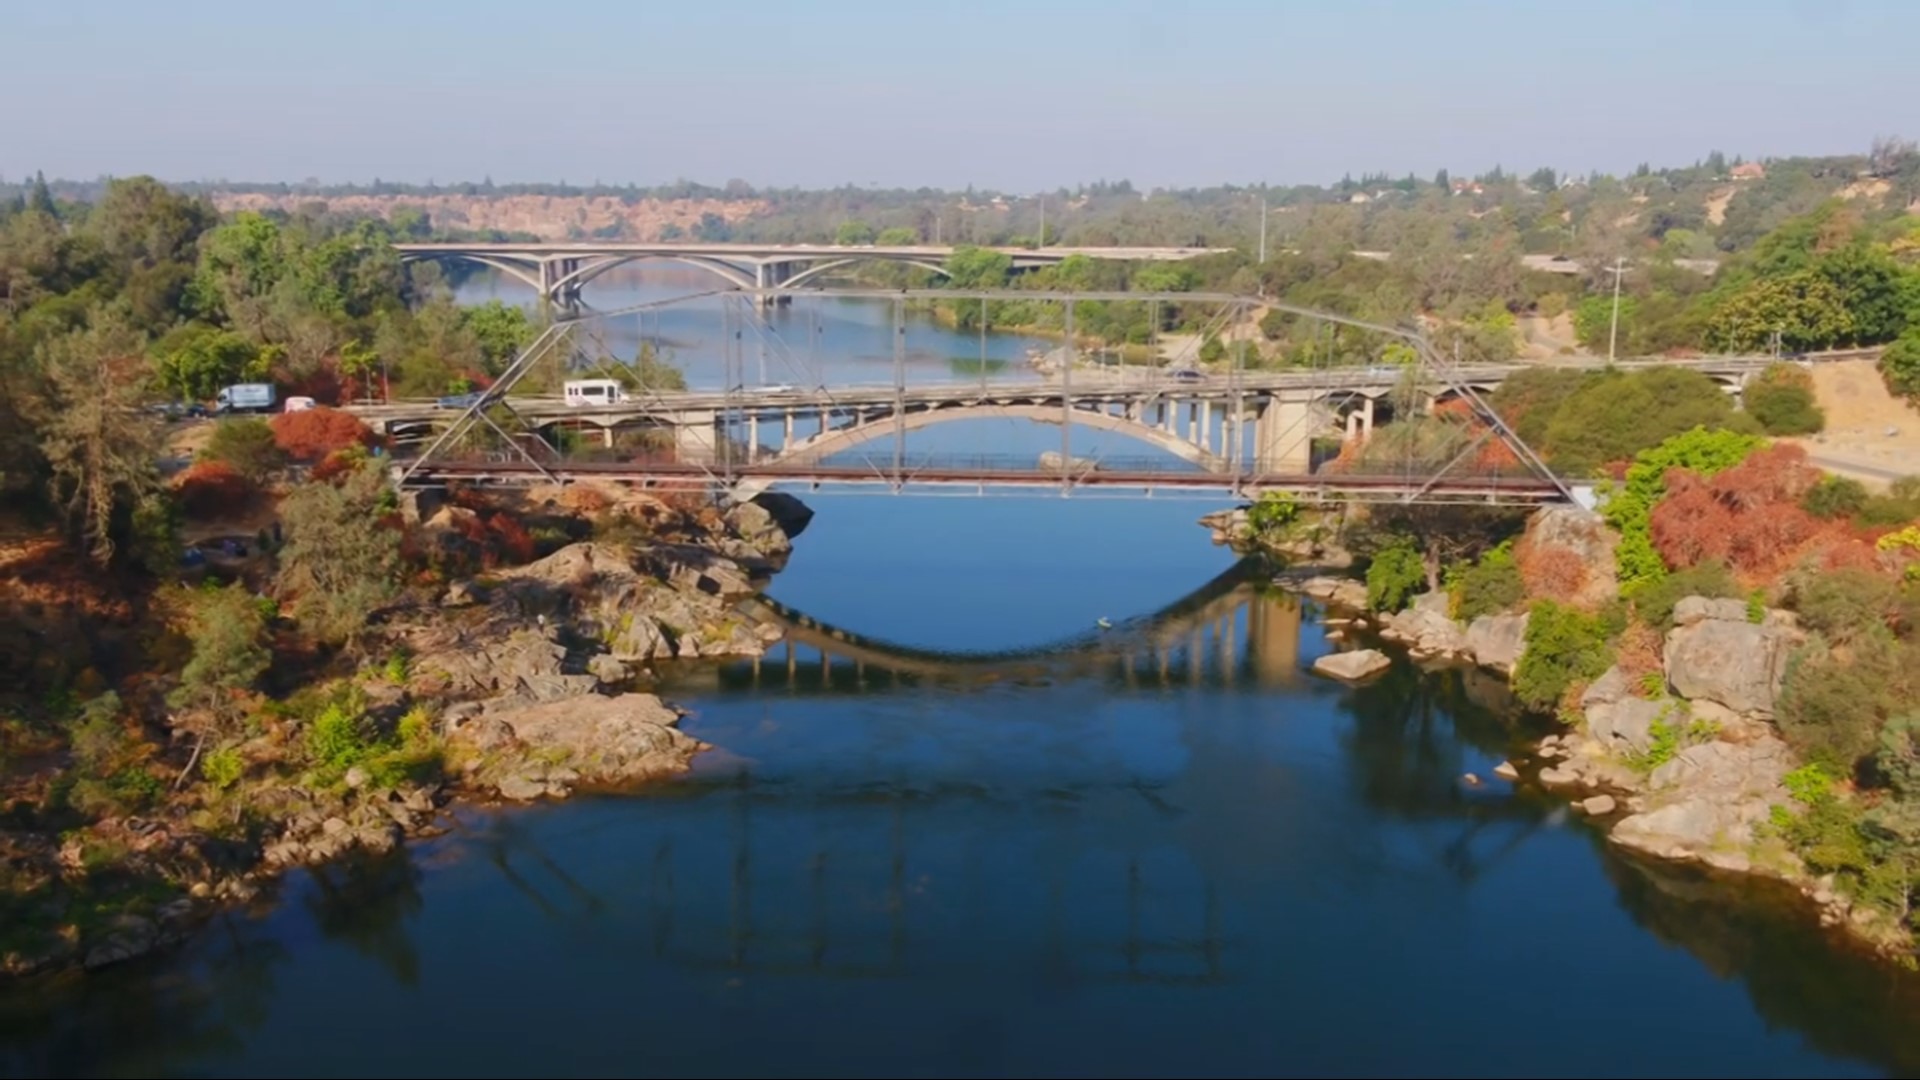 Uncovering the excitement in Folsom's 95630 zip code, from the Rainbow Bridge to Snook's Chocolate Factory and much more.